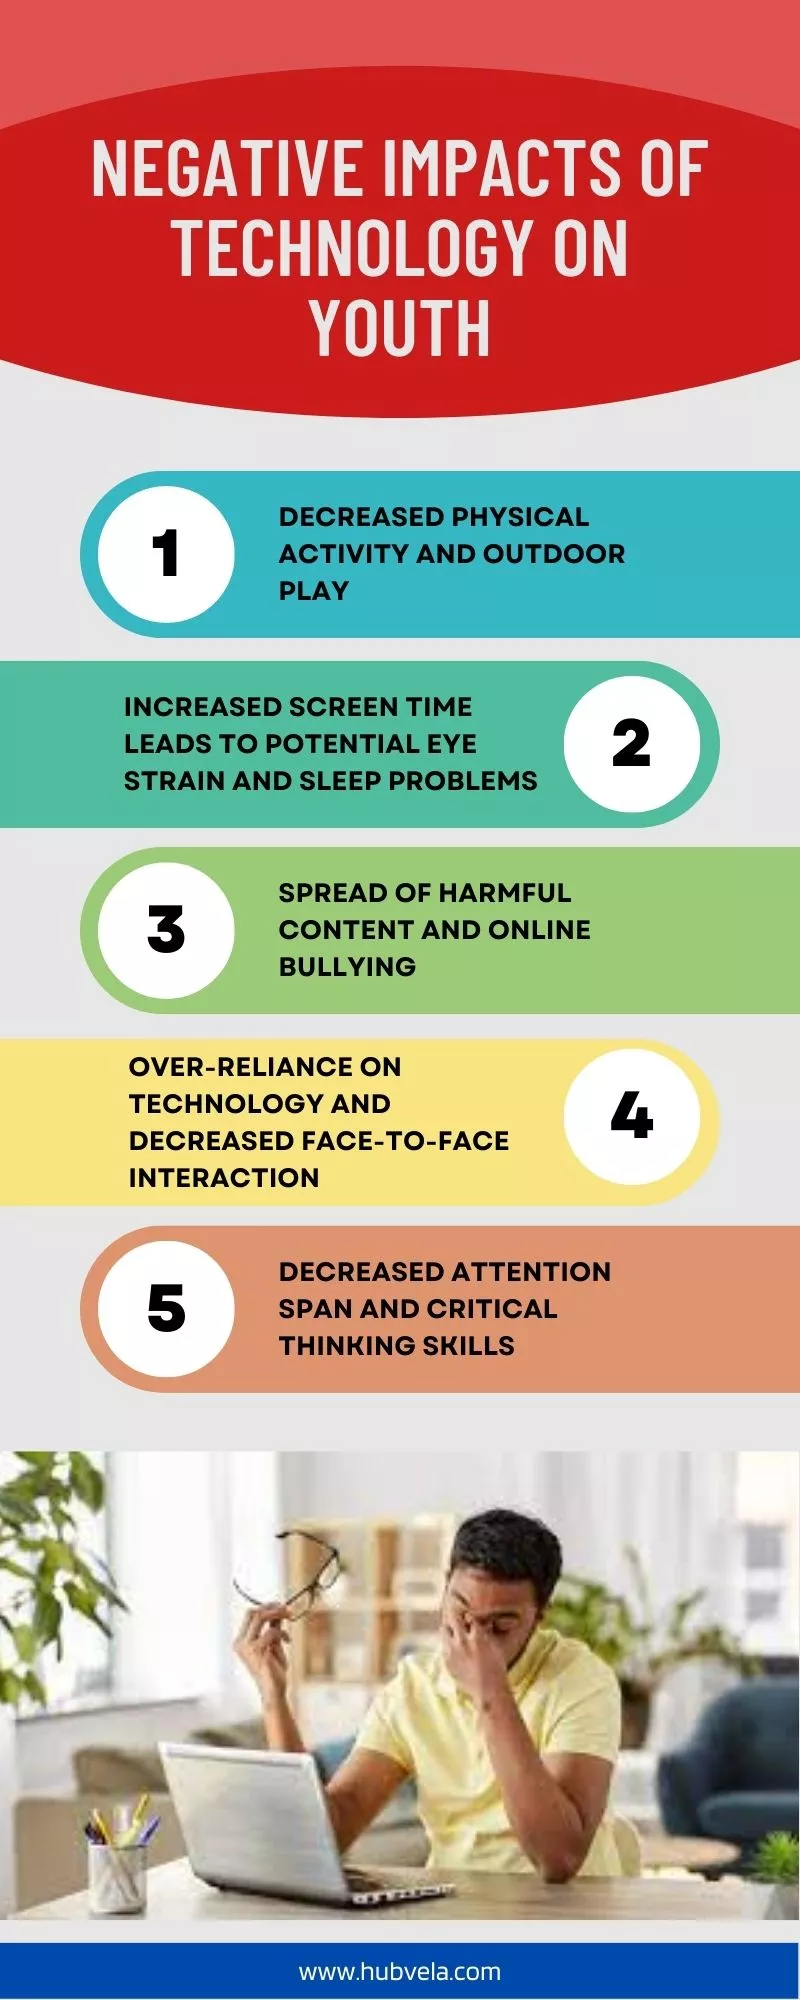 Negative Impacts of Technology on Youth infographic